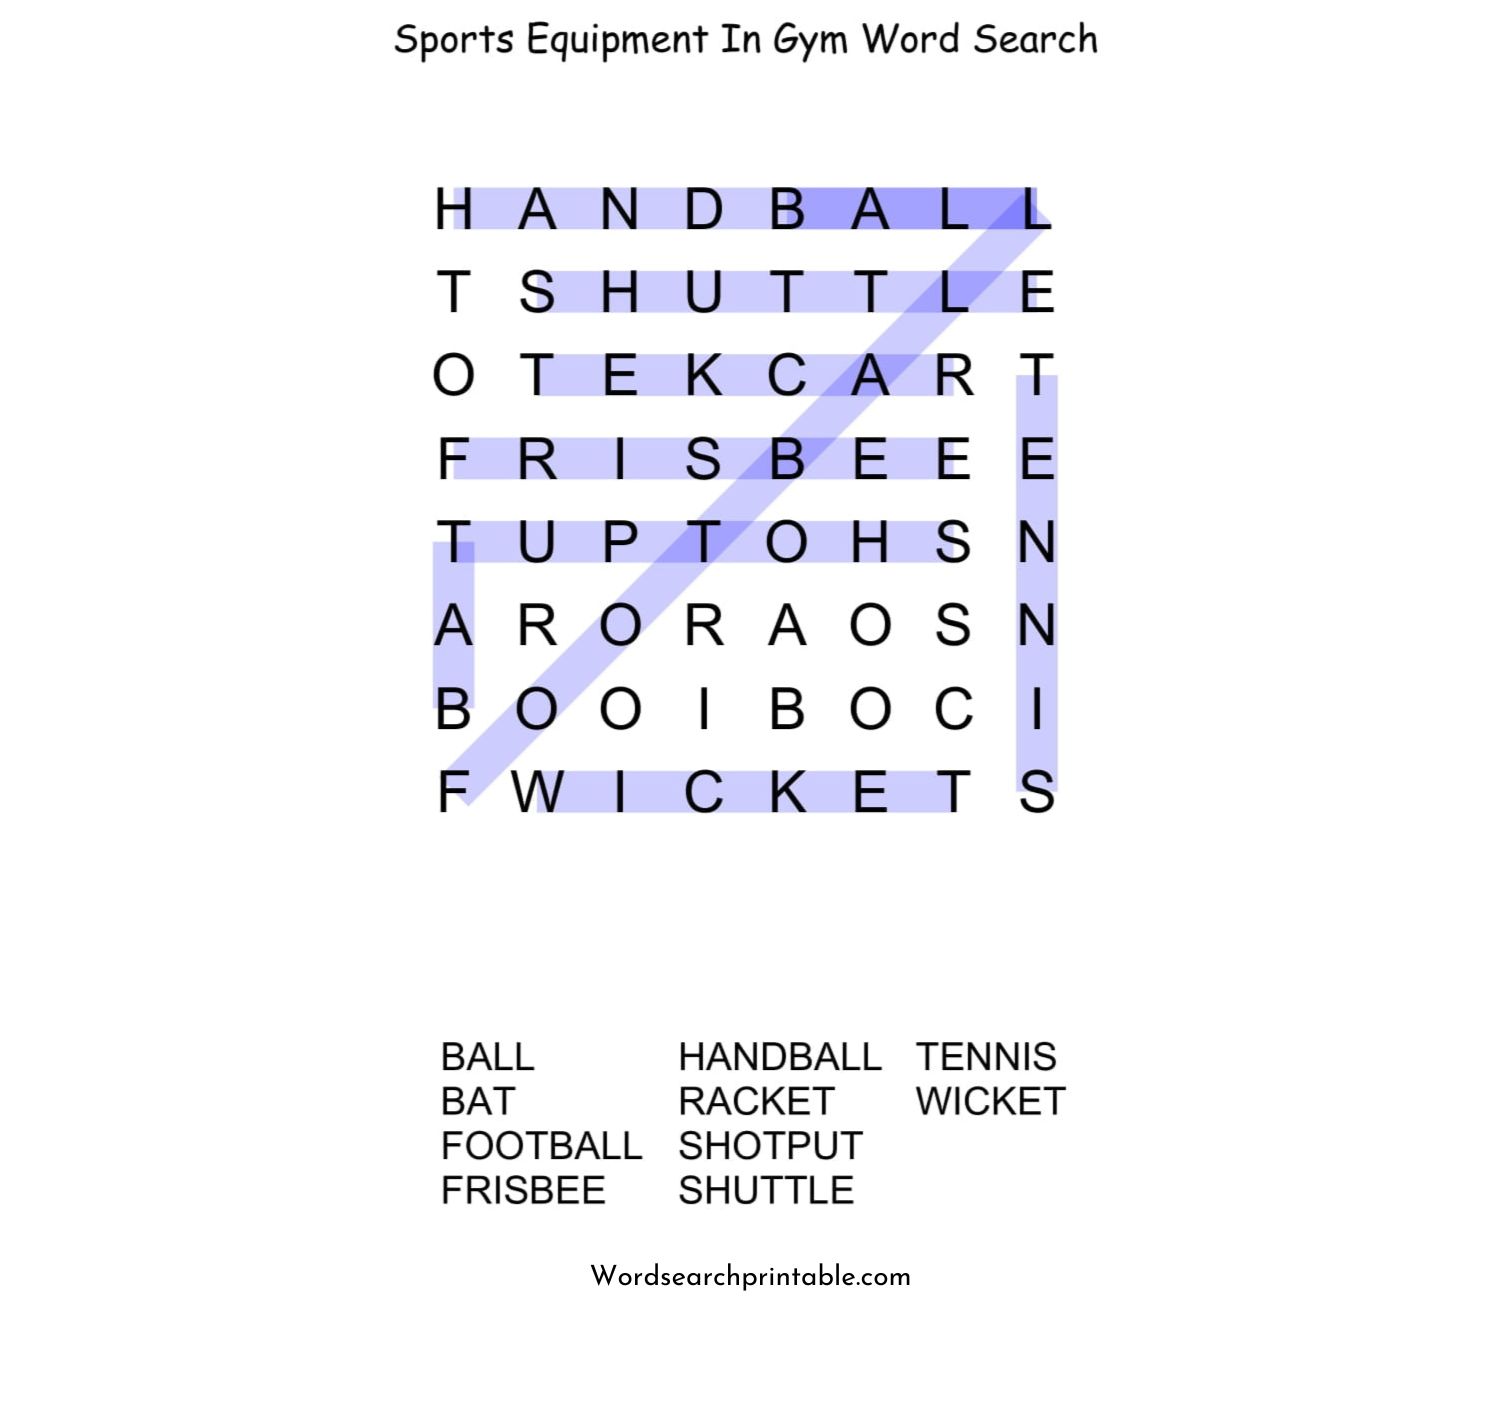 sports equipment in gym word search puzzle solution